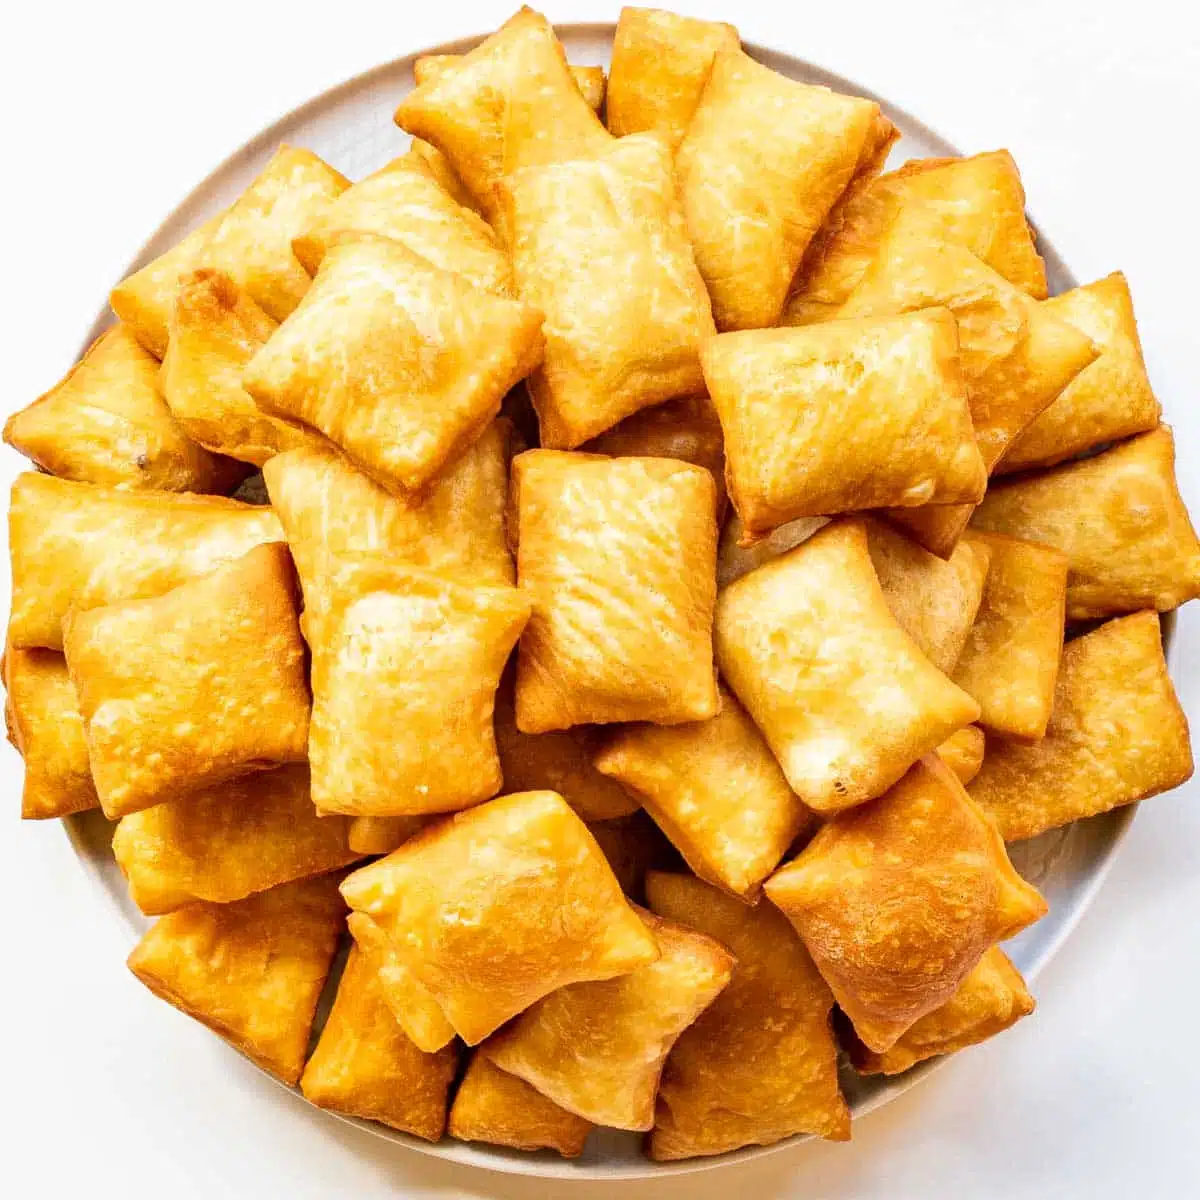 freshly fried sopapillas on a big white plate.